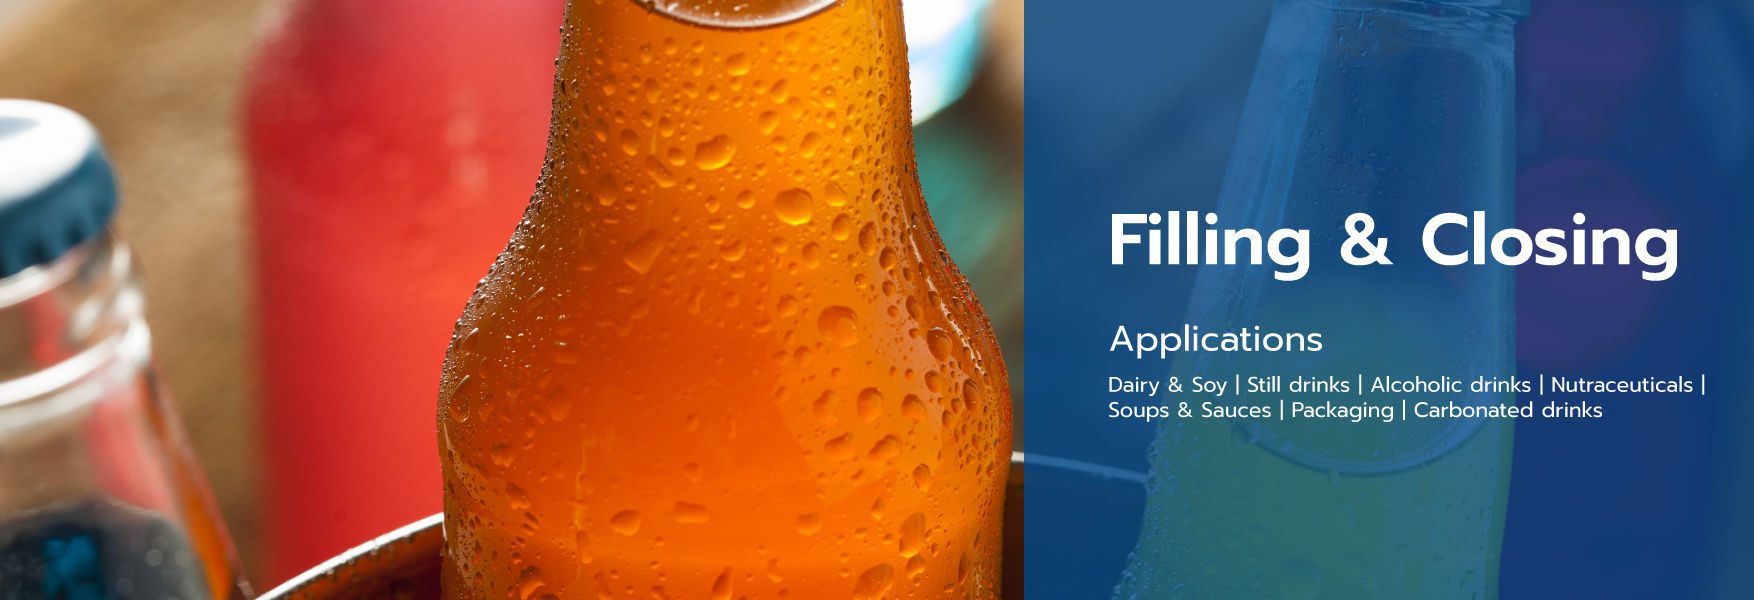 Filling & Closing Applications  Dairy & Soy | Still drinks | Alcoholic drinks | Nutraceuticals | Sou